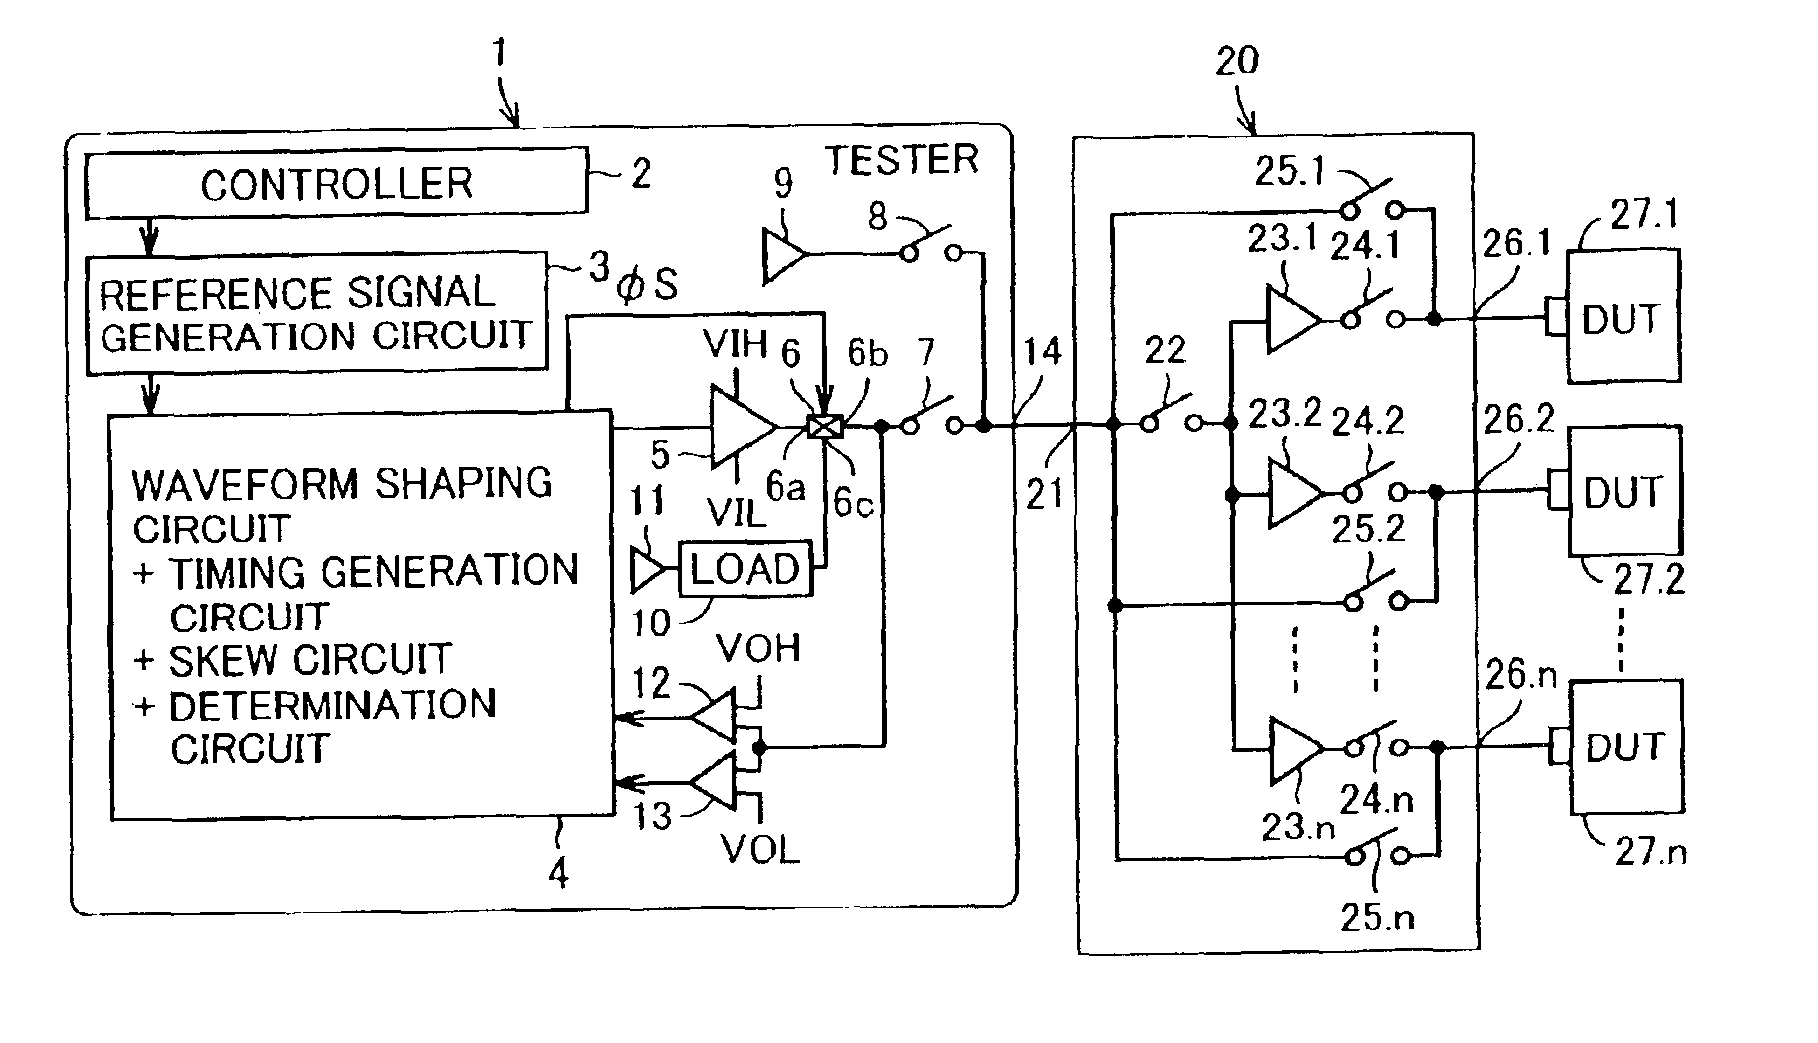 Interface circuit coupling semiconductor test apparatus with tested semiconductor device